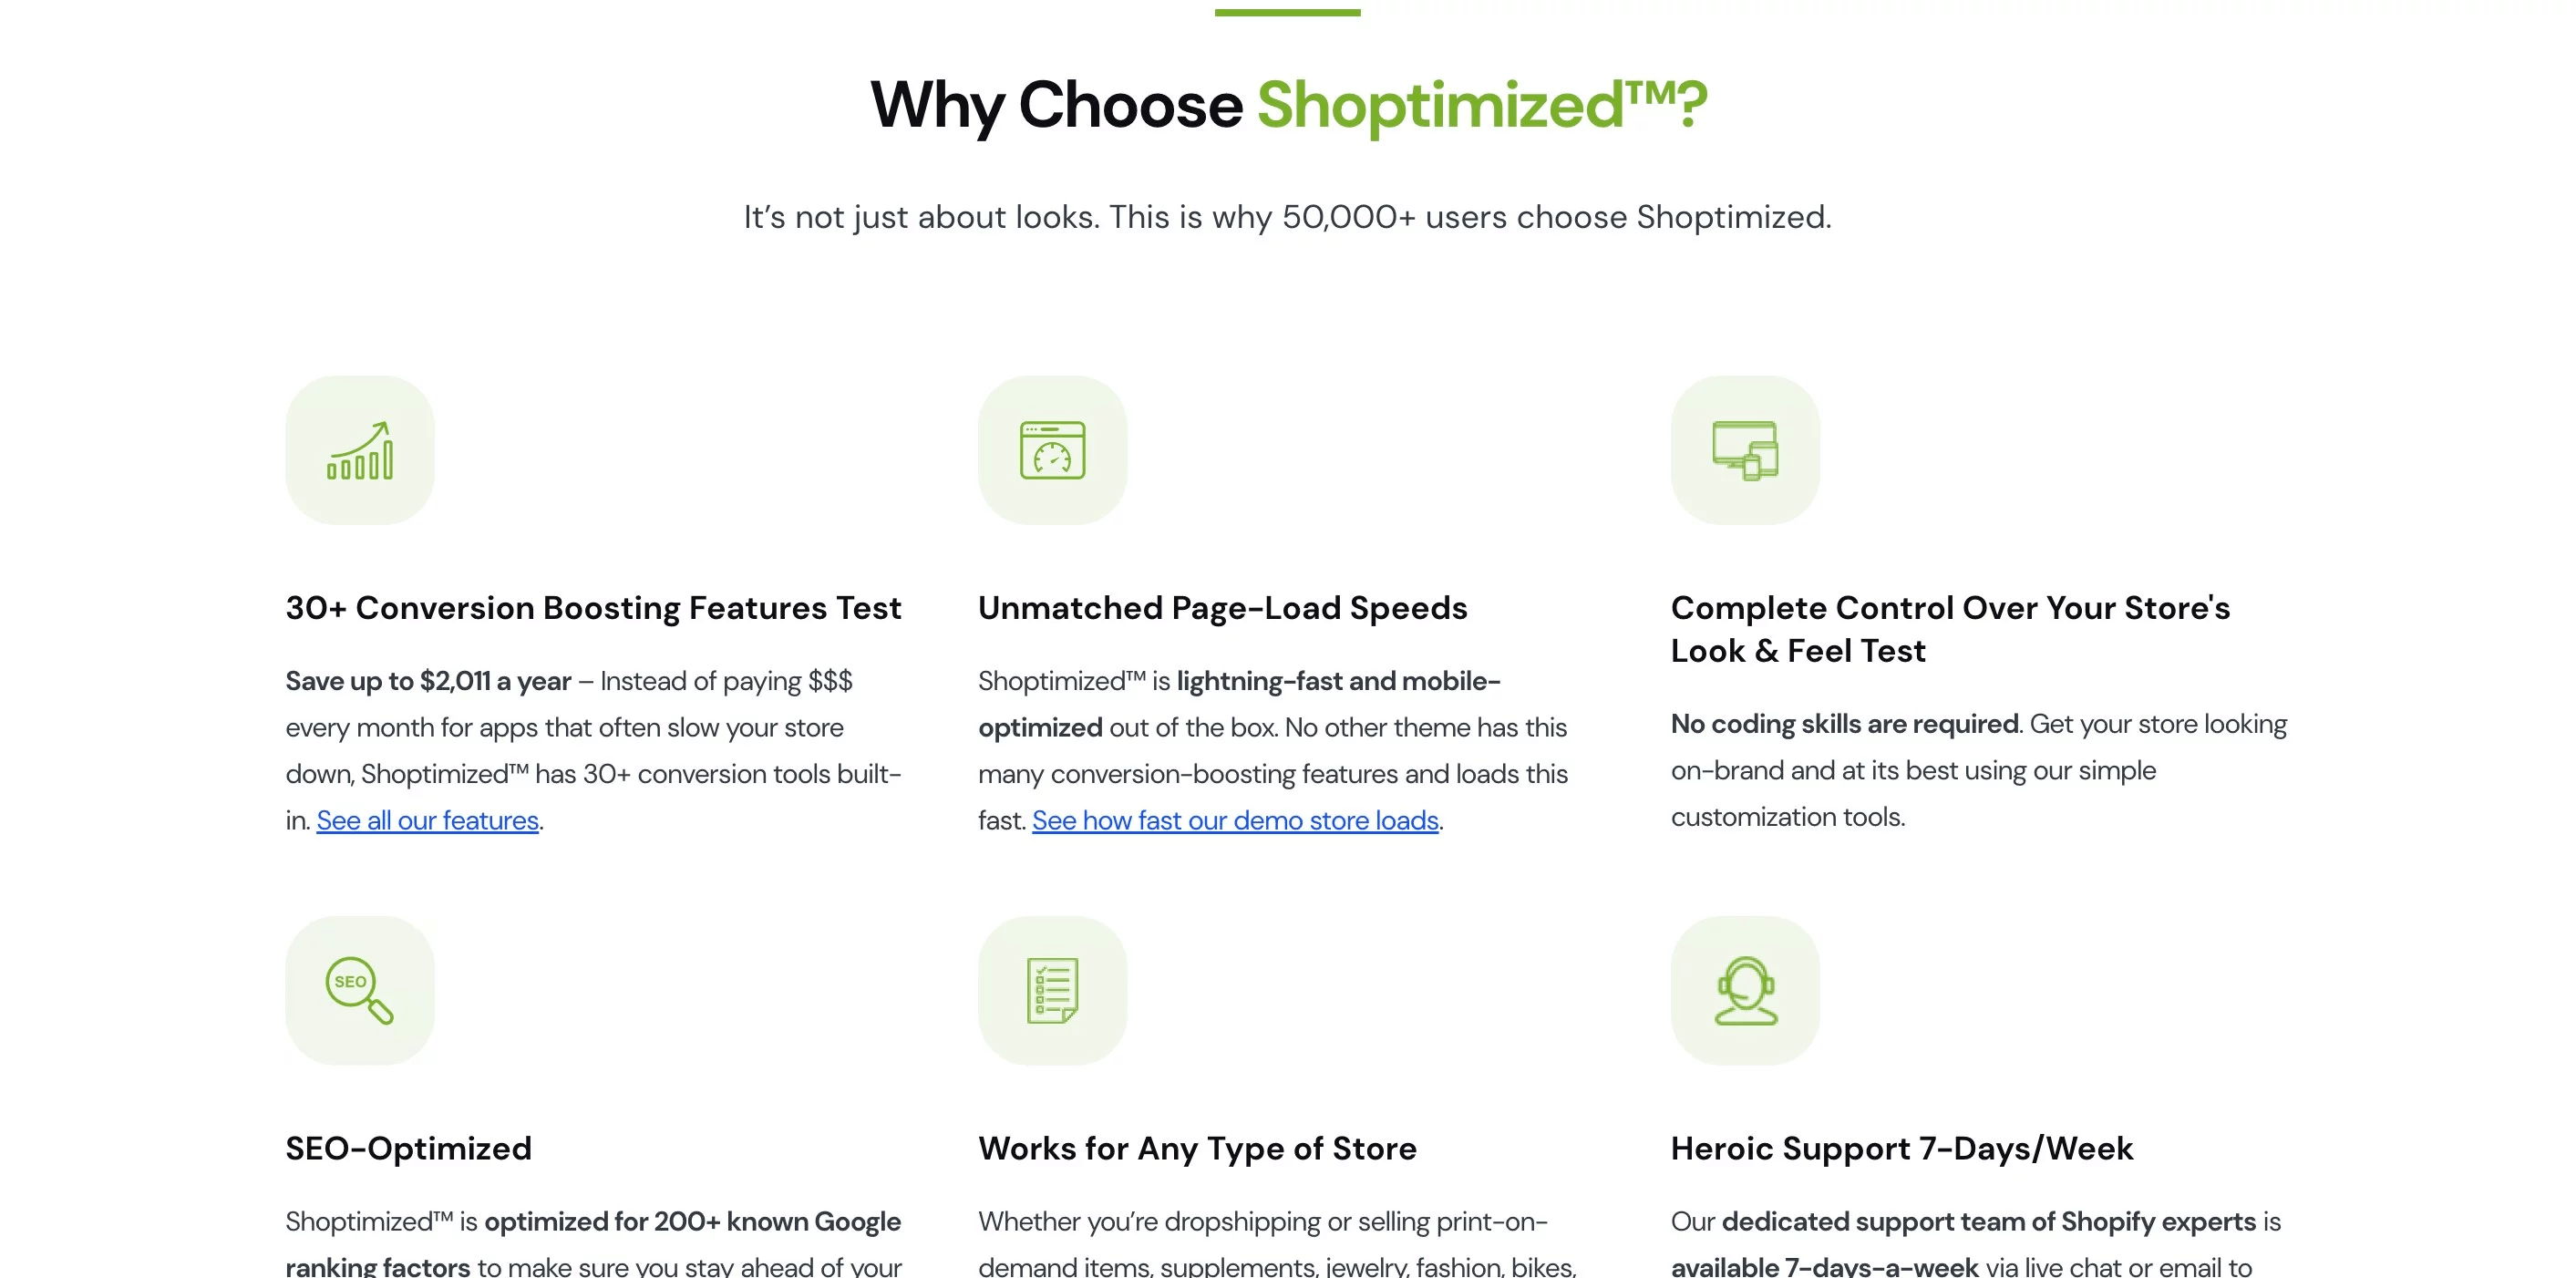 Some other features of the Shoptimized theme